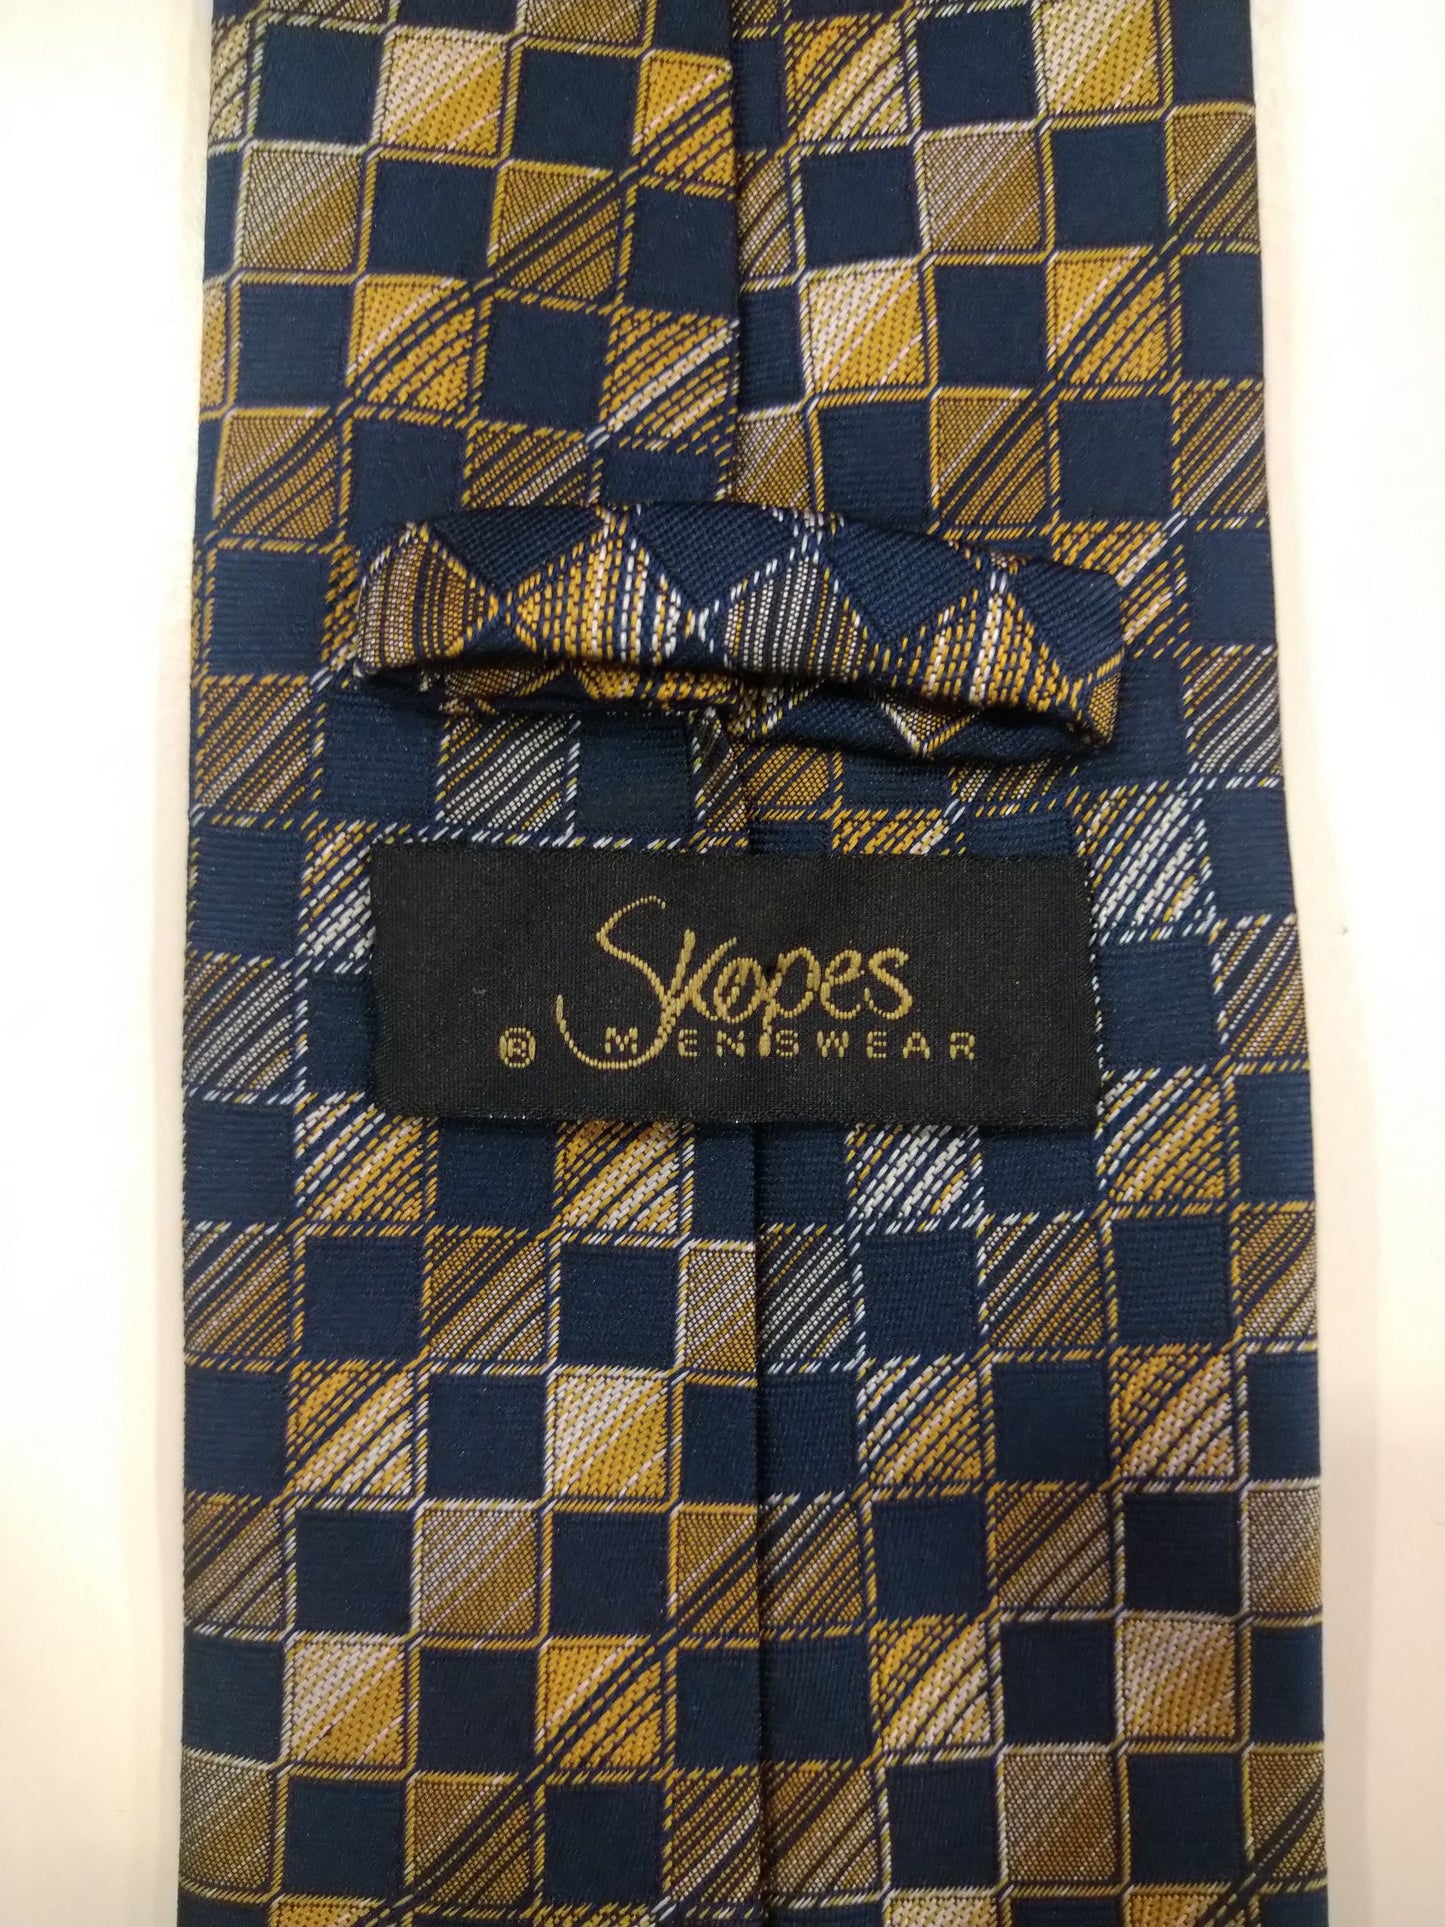 Skopes polyester tie. Separate blue gray yellow motif.